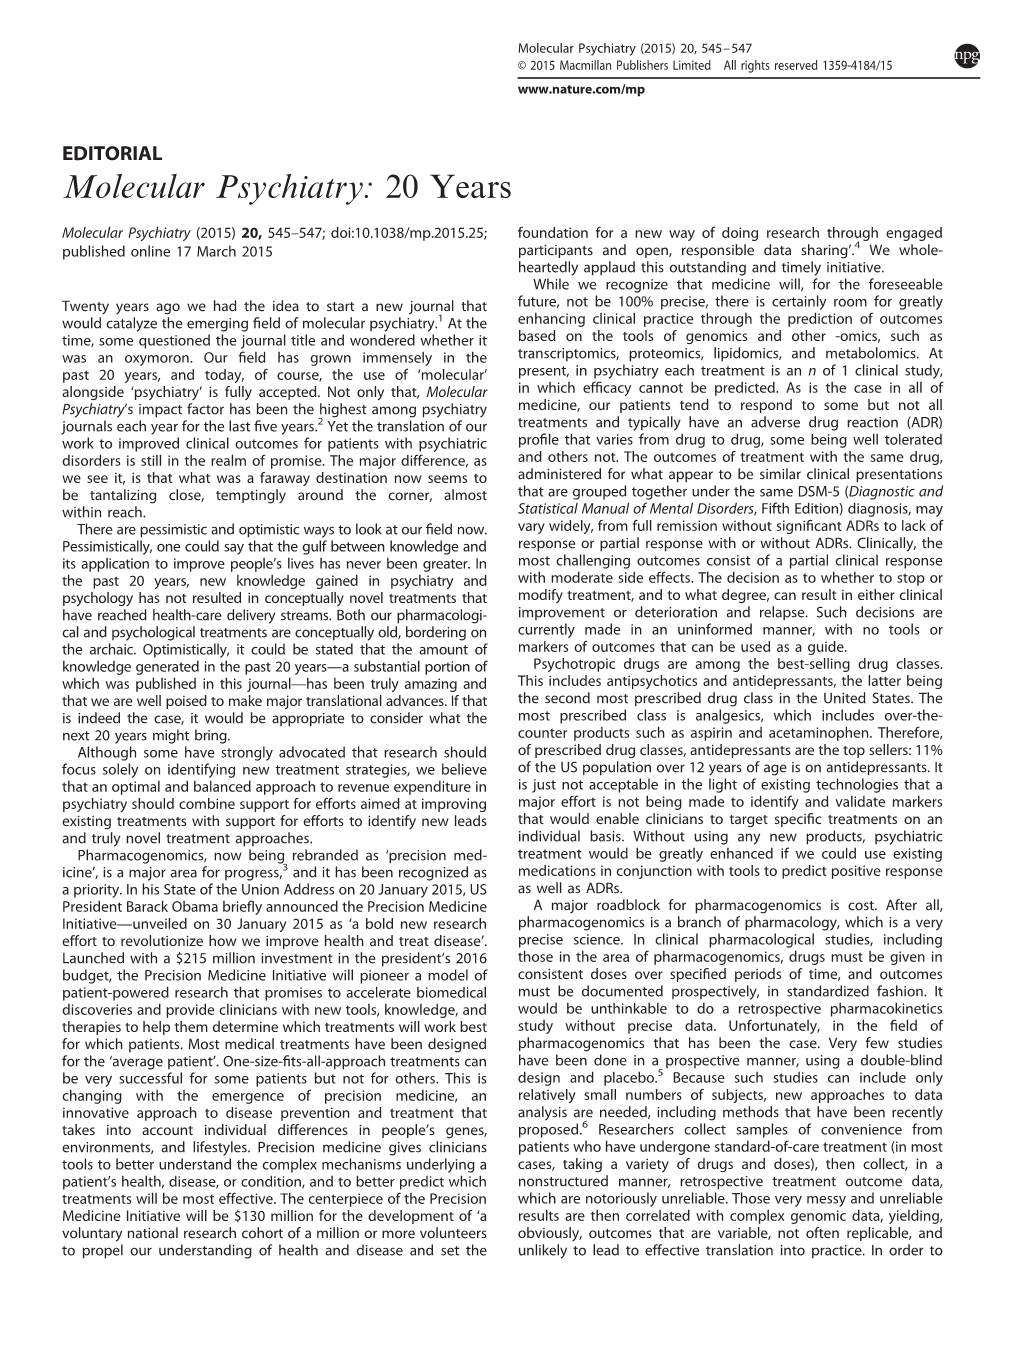 Molecular Psychiatry (2015) 20, 545–547 © 2015 Macmillan Publishers Limited All Rights Reserved 1359-4184/15